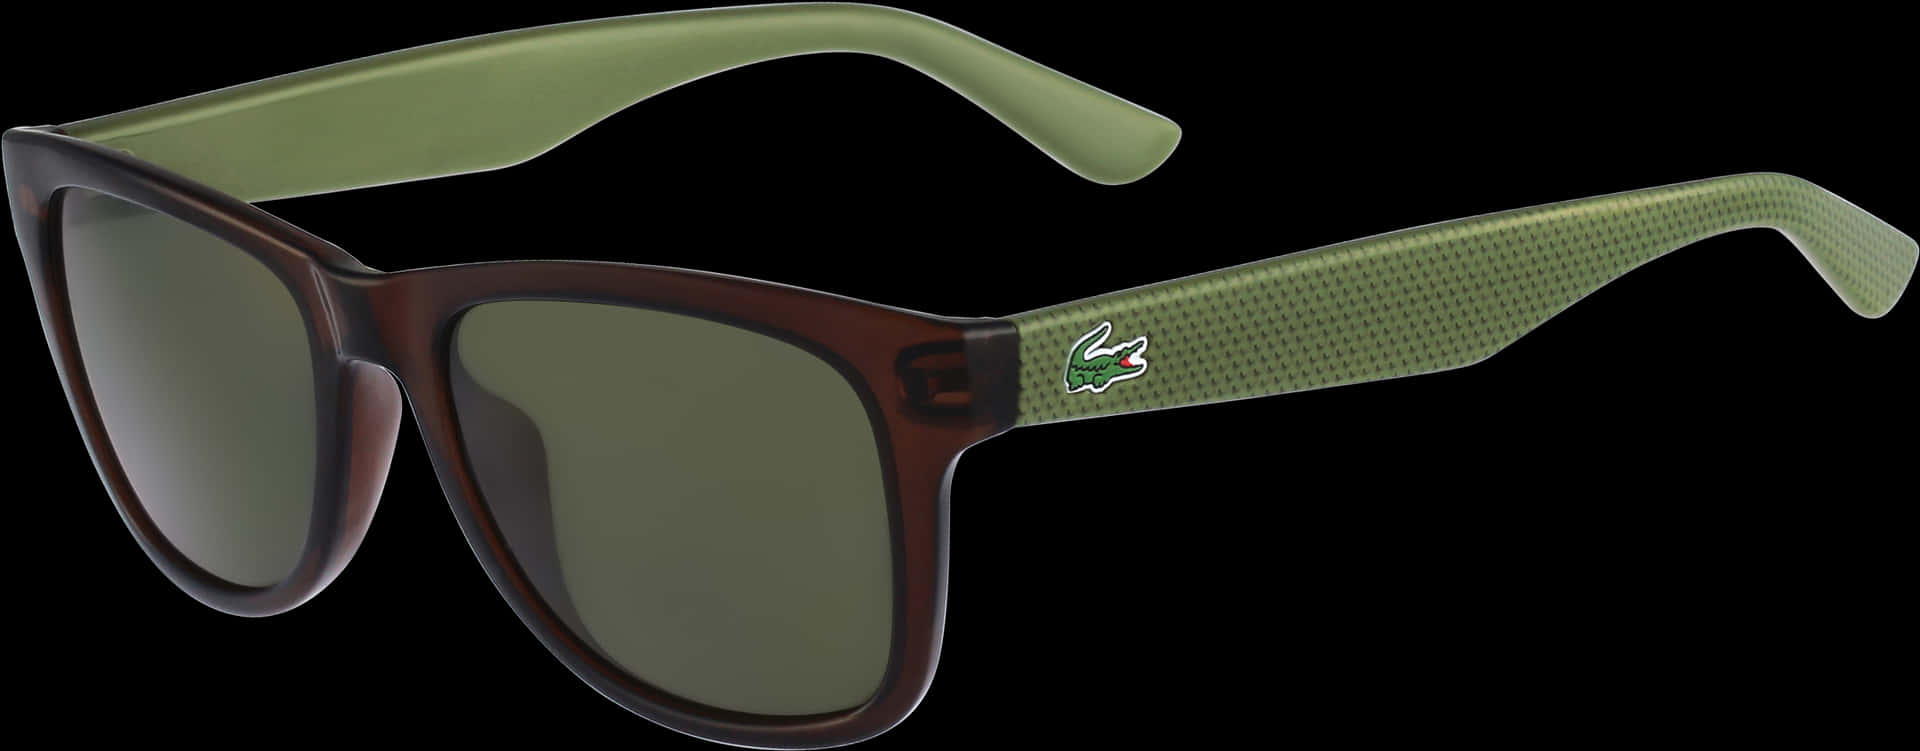 Designer Sunglasseswith Green Accents PNG